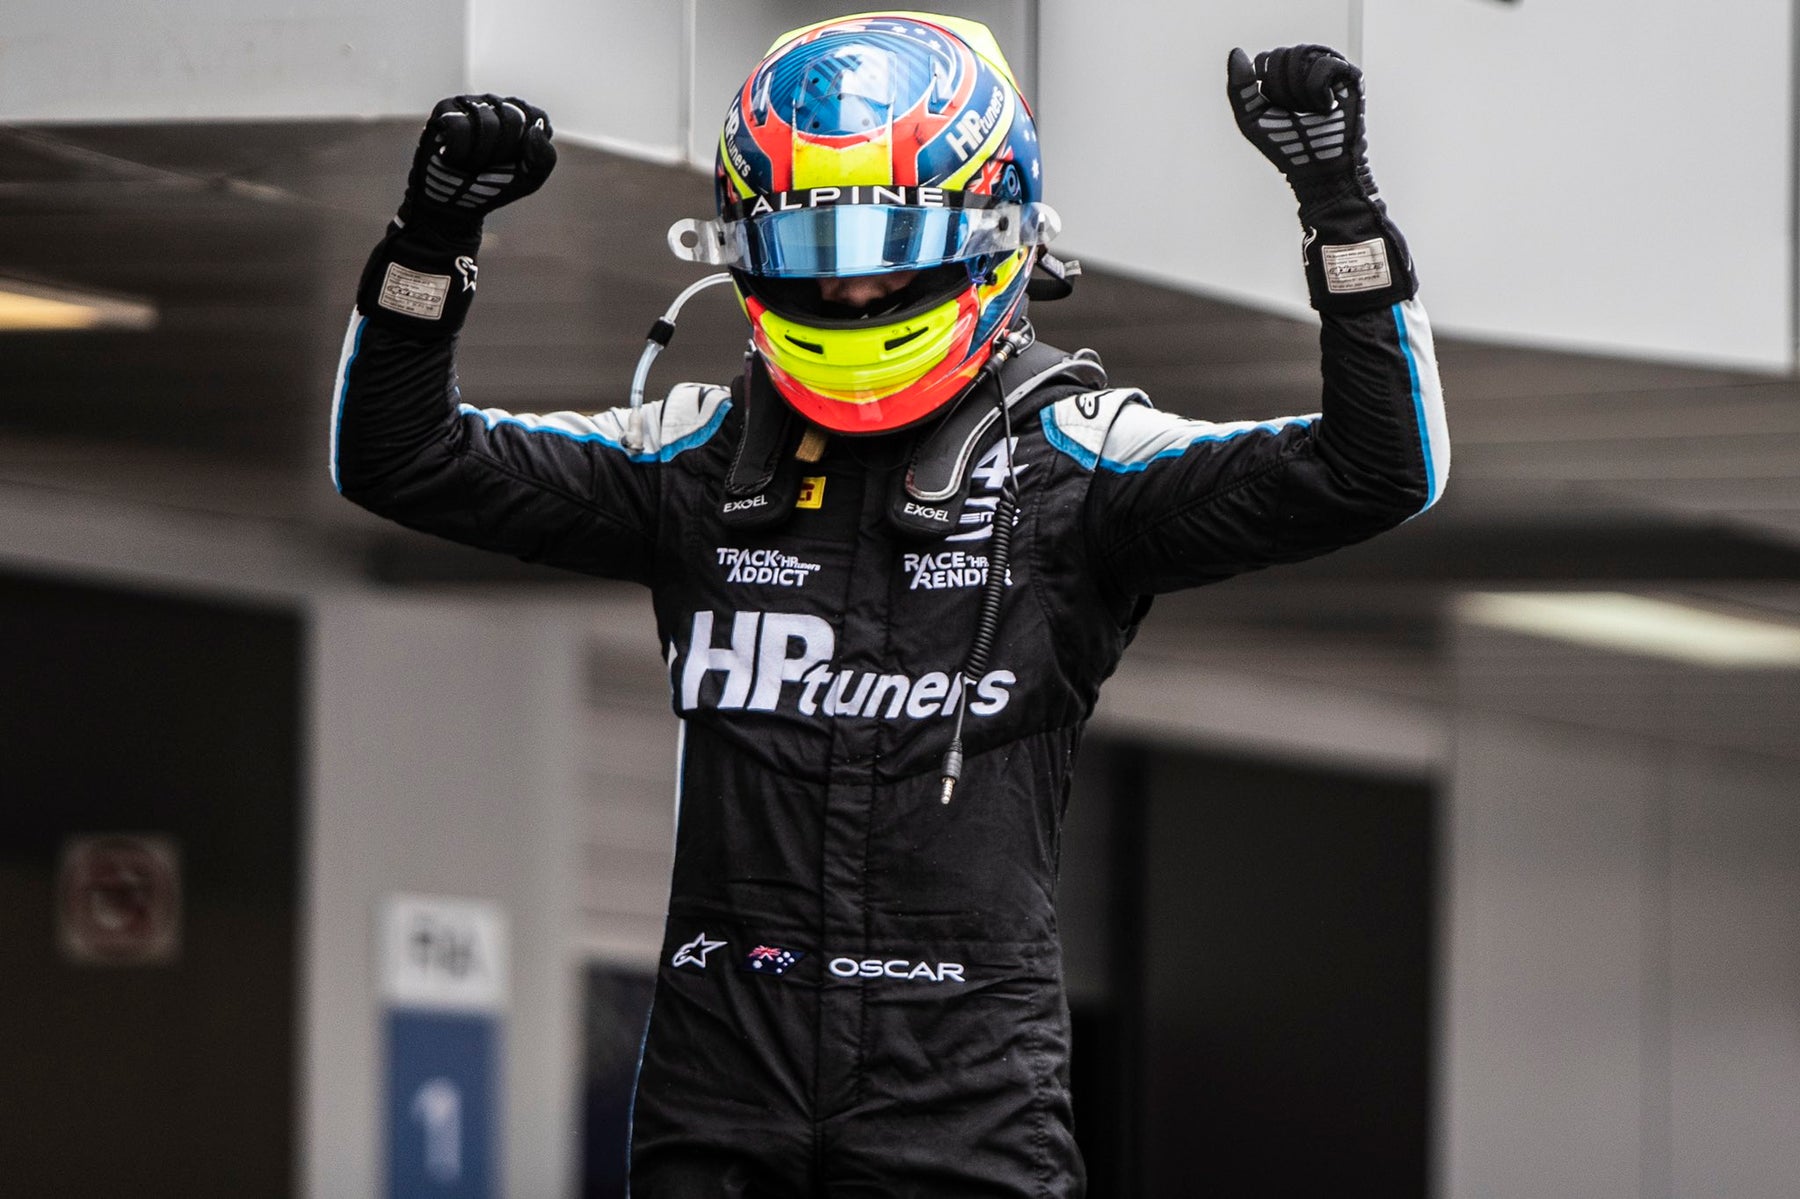 ALPINESTARS 1-2 AS OSCAR PIASTRI TRIUMPHS IN F2 FEATURE RACE AT SOCHI; THEO POURCHAIRE SECOND